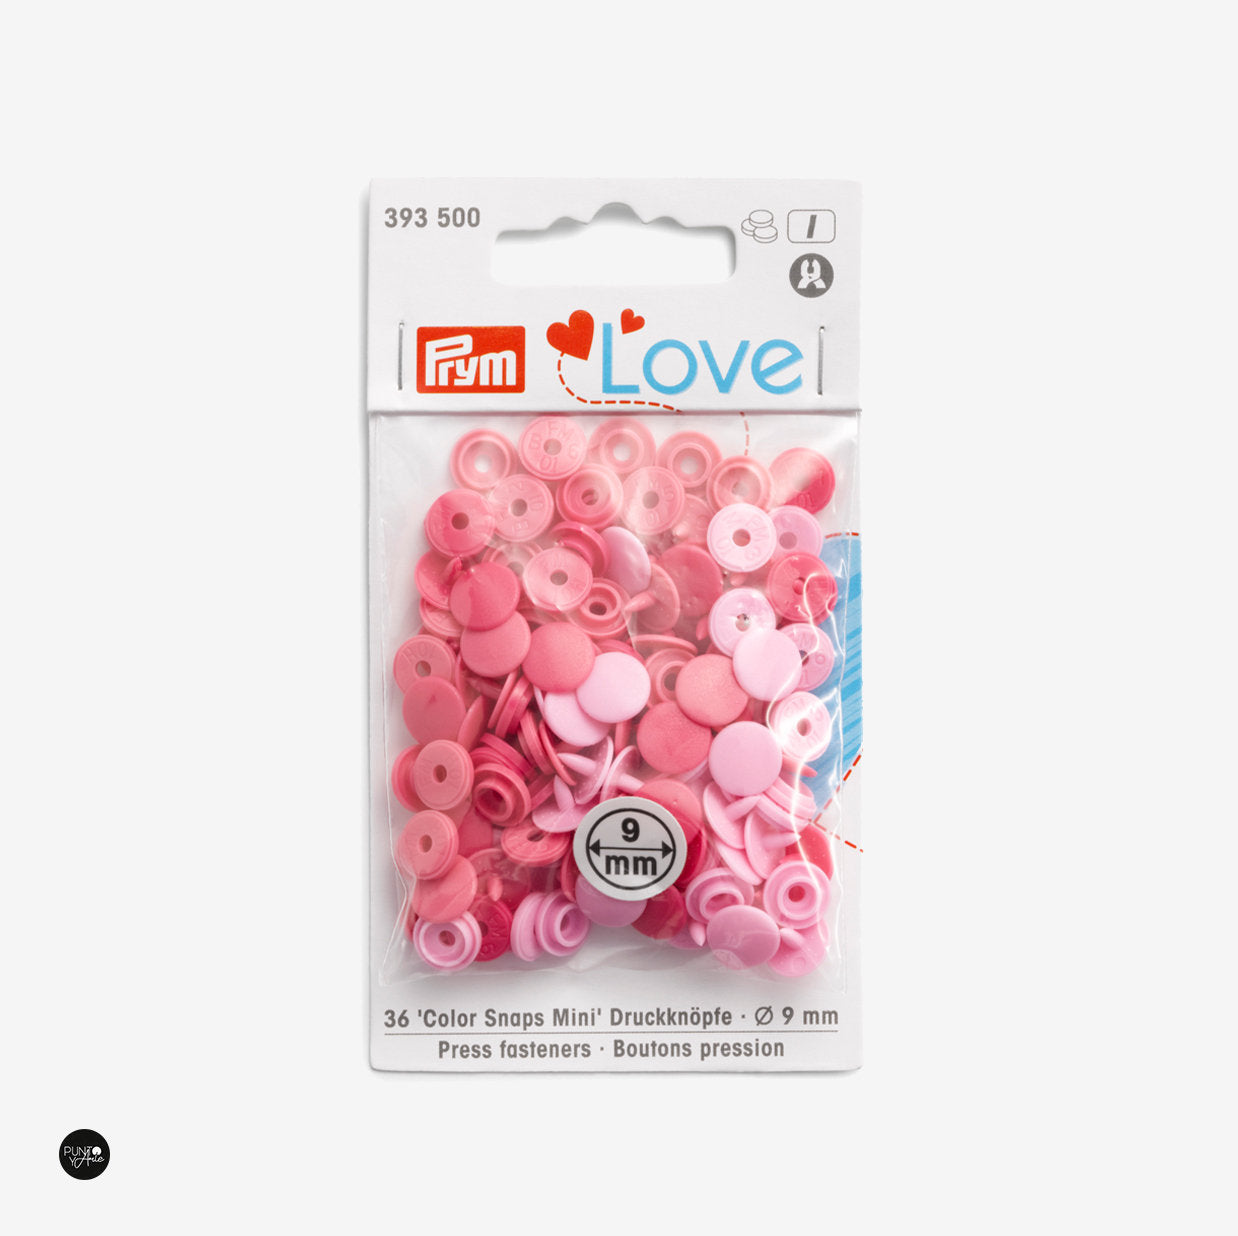 Press Buttons Or Snaps 9 mm - Prym Love 393500